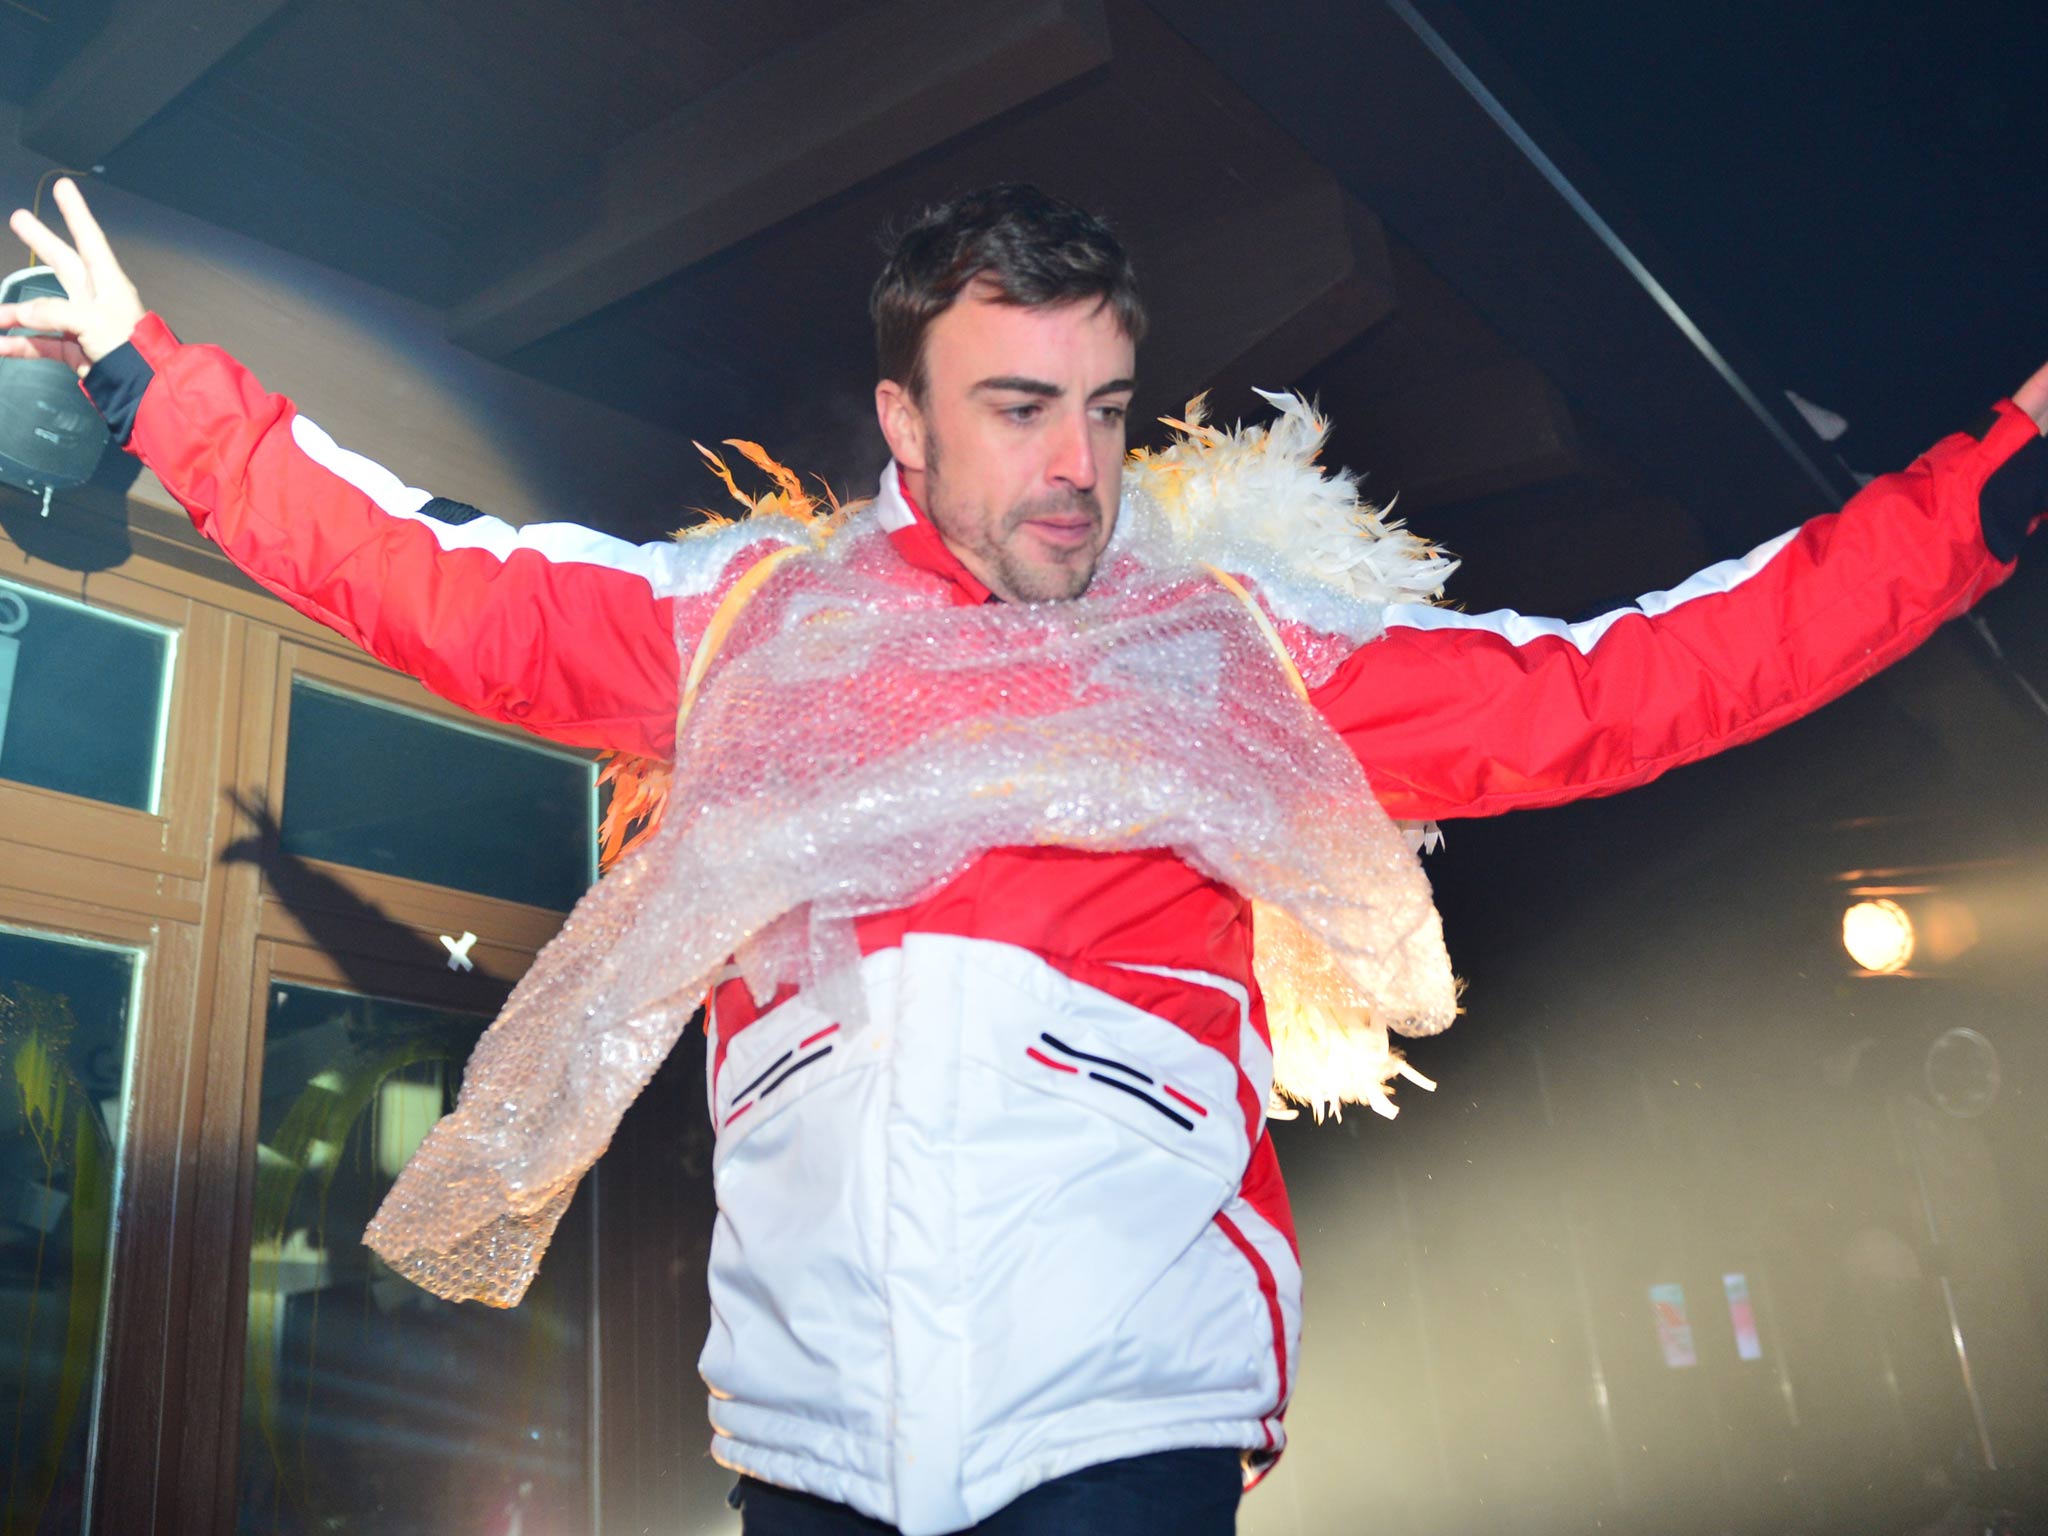 Ferrari driver Fernando Alonso performs on stage during a show at the Wrooom, F1 and MotoGP press ski meeting earlier this month